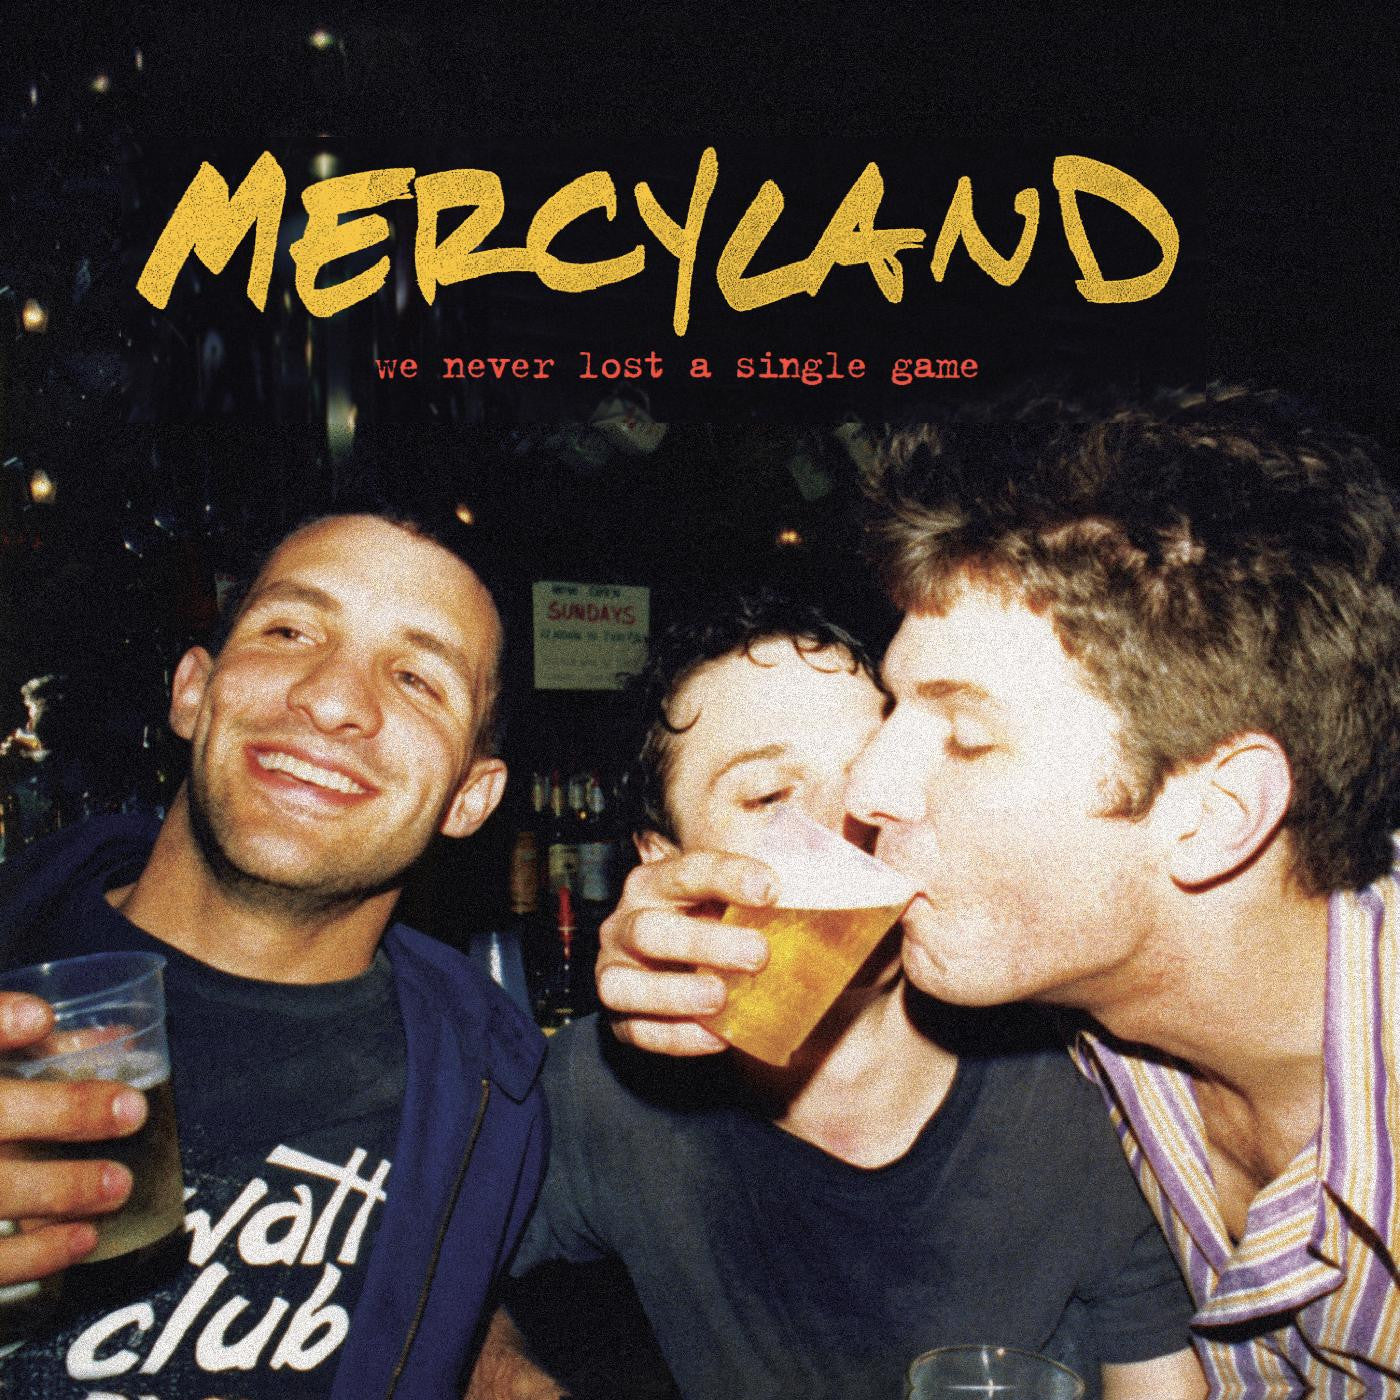 Mercyland – We Never Lost A Single Game [YELLOW/RED SWIRL VINYL] – New LP